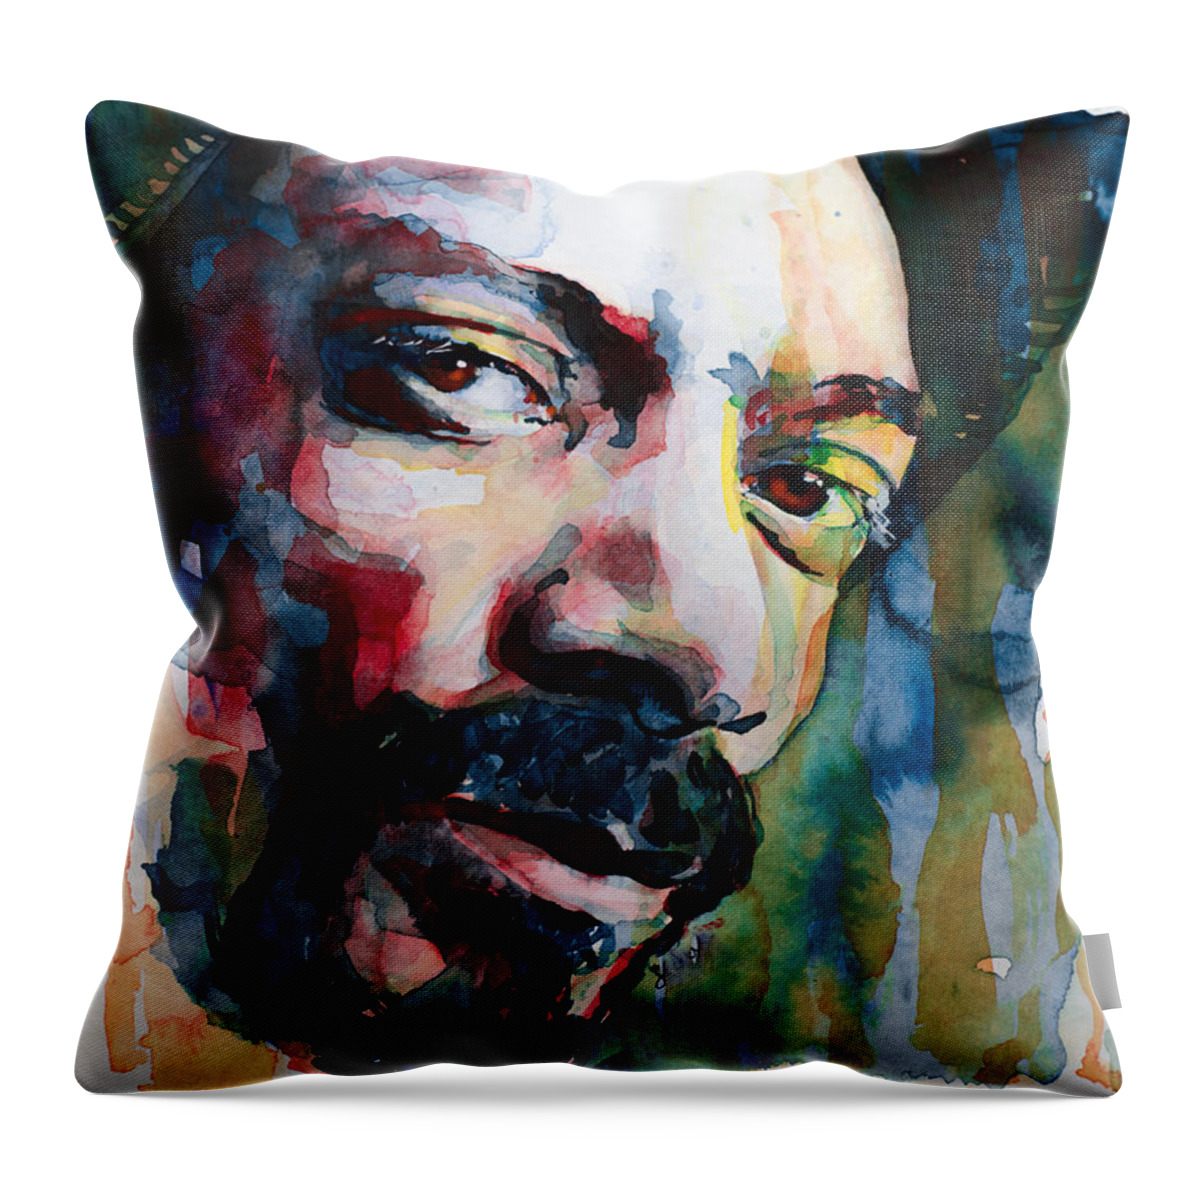 Snoop Dogg Throw Pillow featuring the painting Snoop Dogg by Laur Iduc